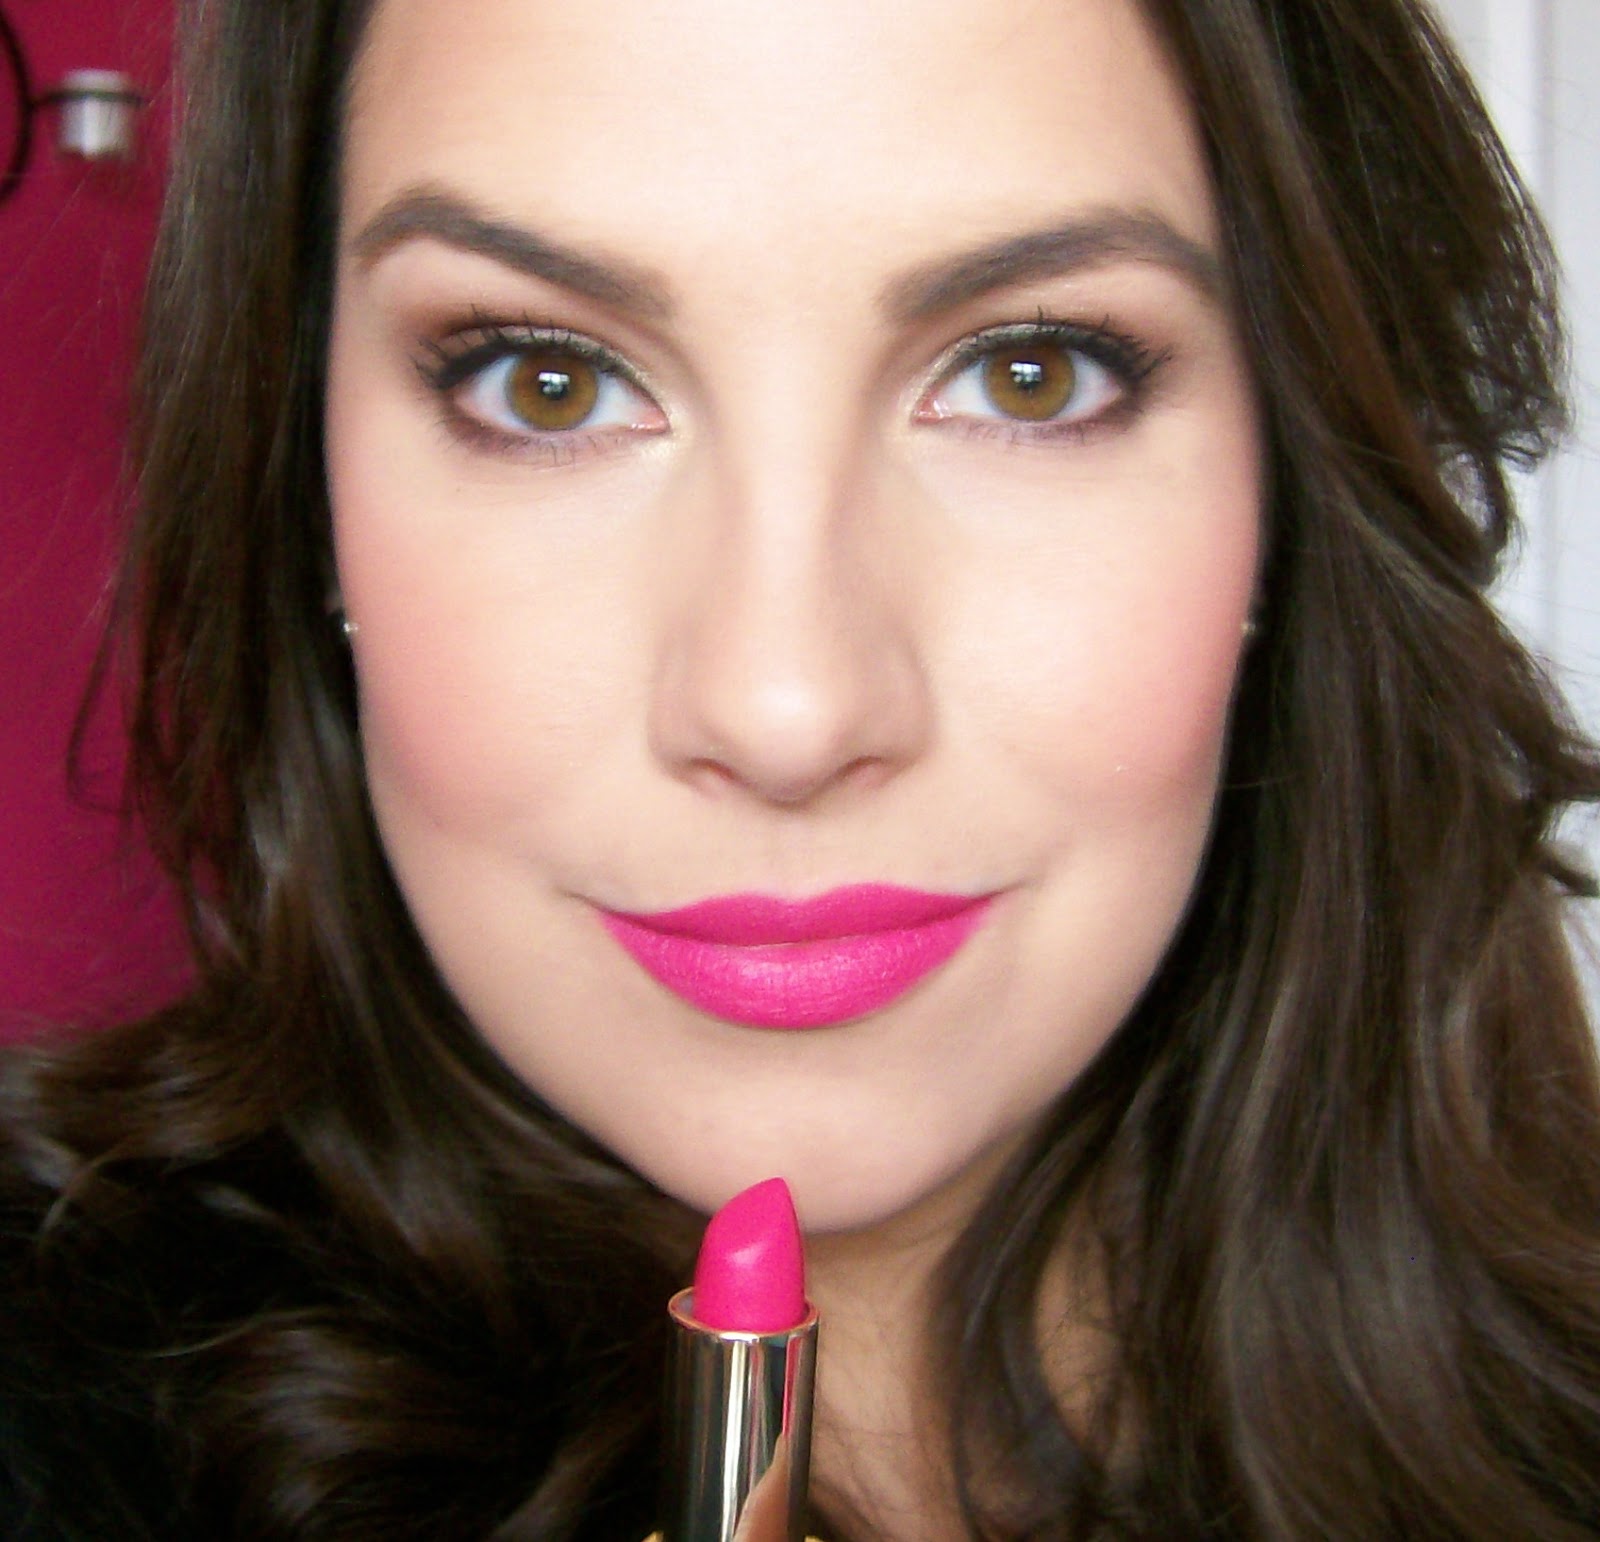 Milani Color Statement Lipstick: Pinks & Corals - BEAUTY BROADCAST